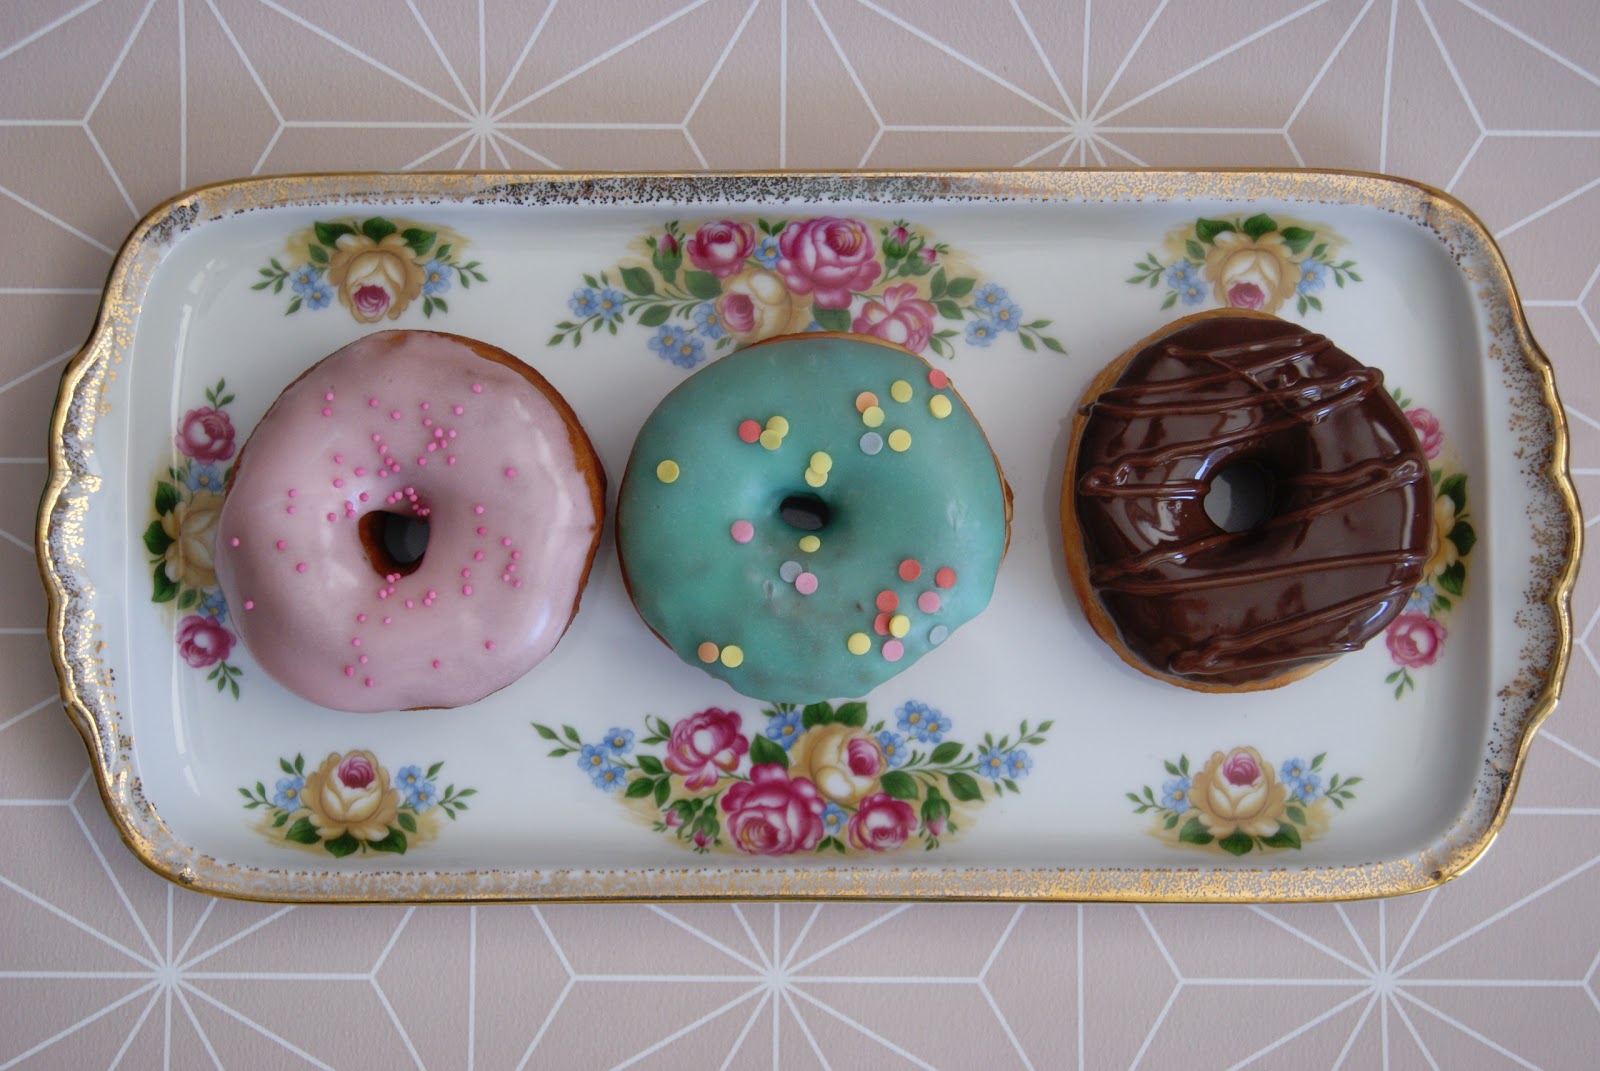 biscuit and buttercream: Bunte Donuts